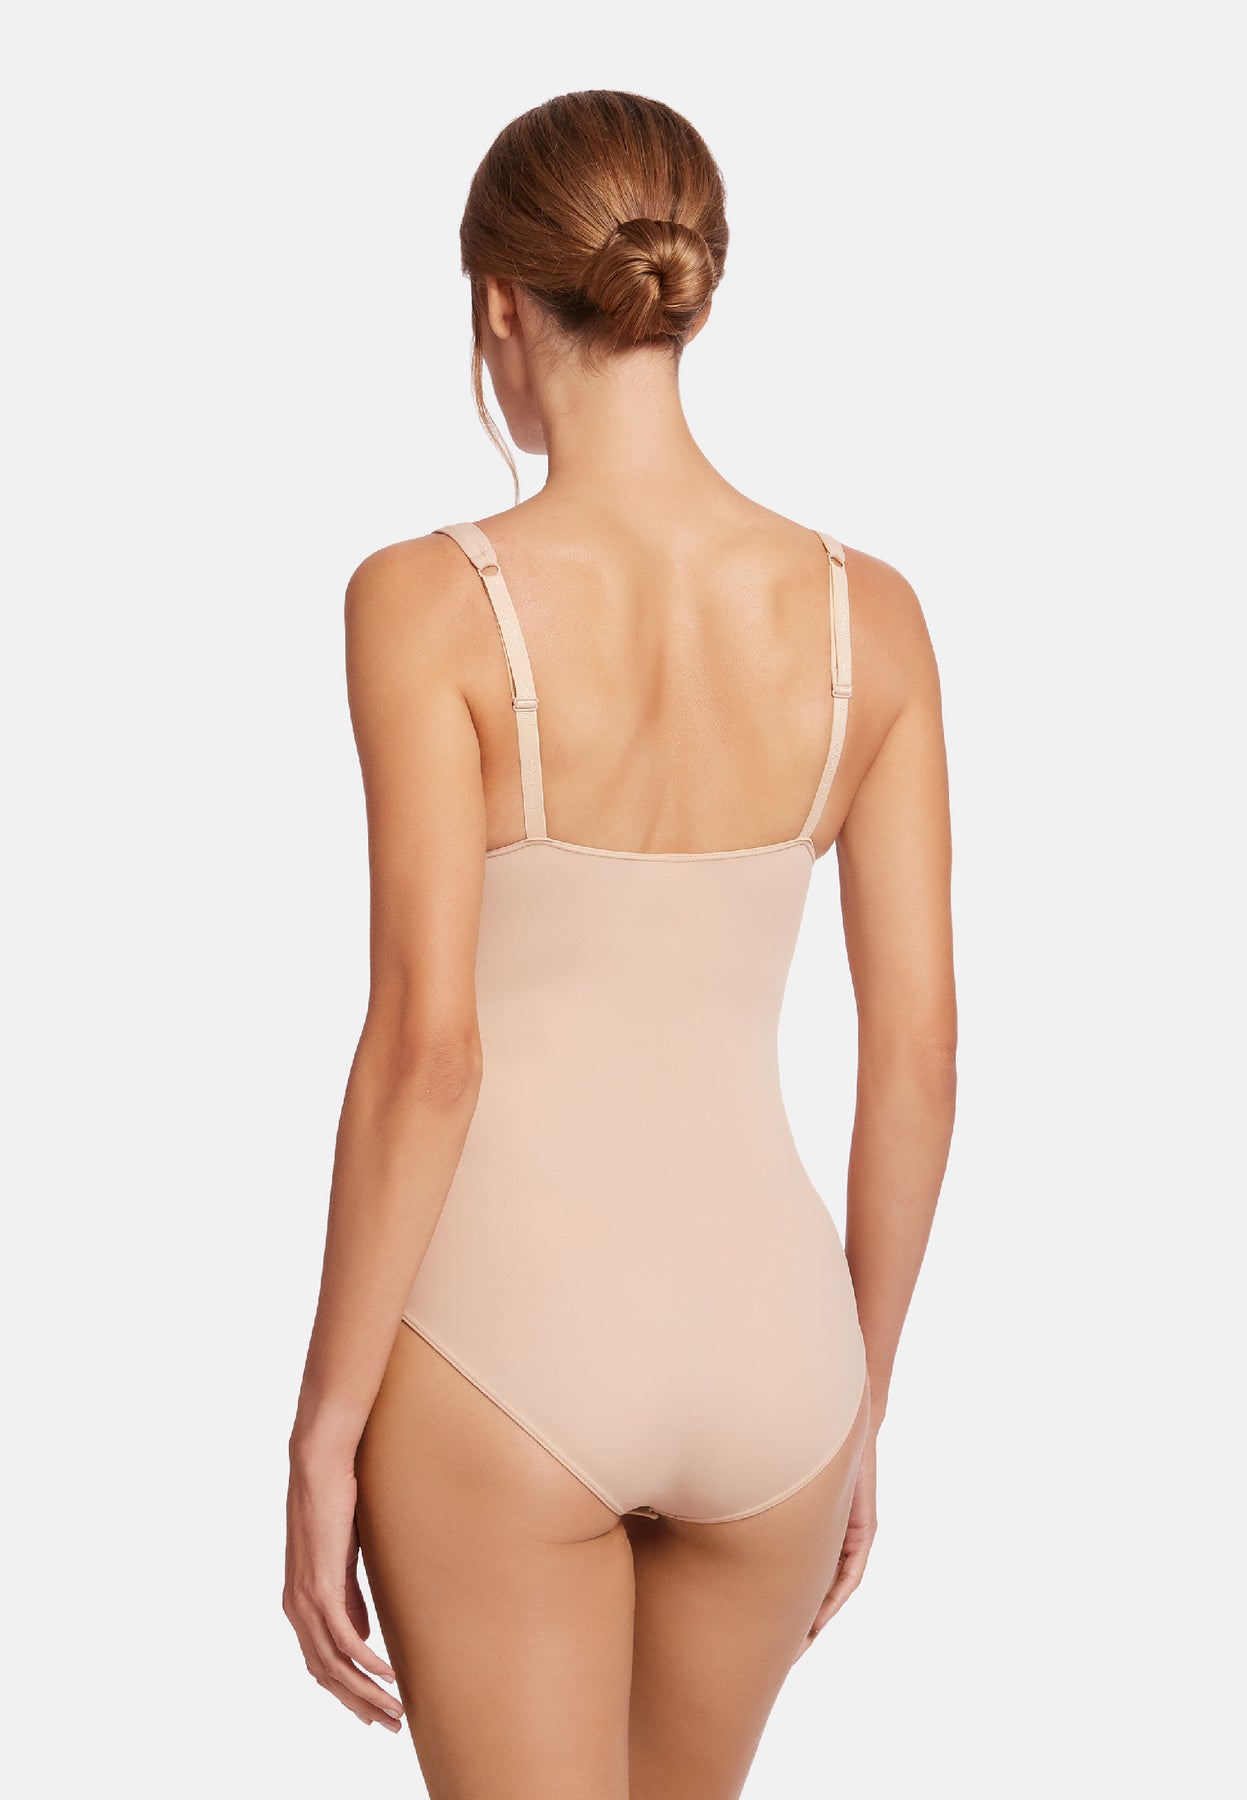 Mat De Luxe Forming String Body - Wolford Sydney & Melbourne